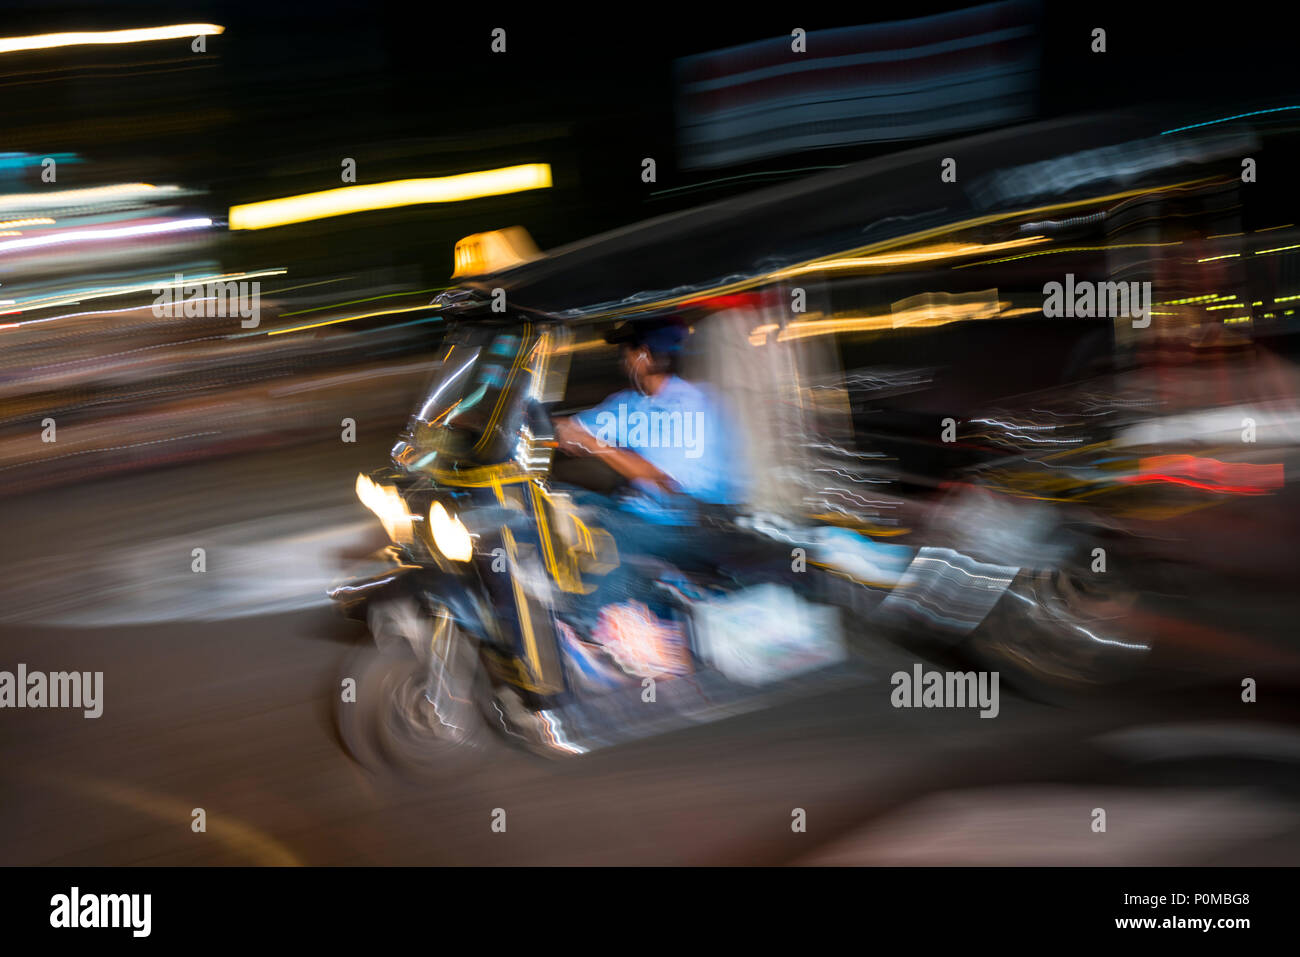 Abstract panning technique creating movement & blur of a tuk-tuk taxi driving at night in the streets of Chiang Mai in northern Thailand Stock Photo